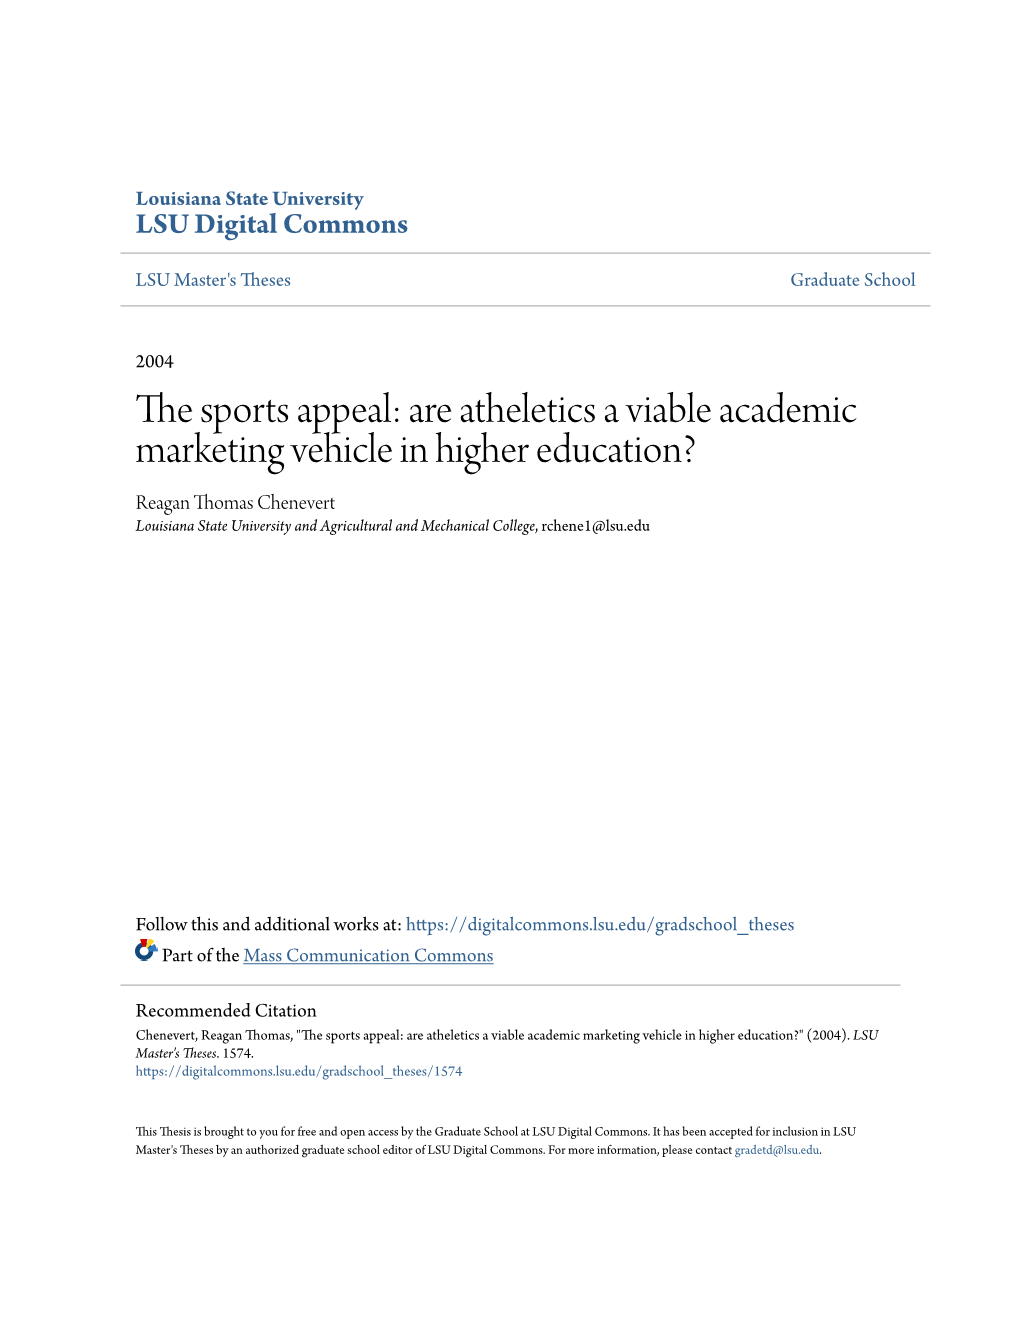 Are Atheletics a Viable Academic Marketing Vehicle in Higher